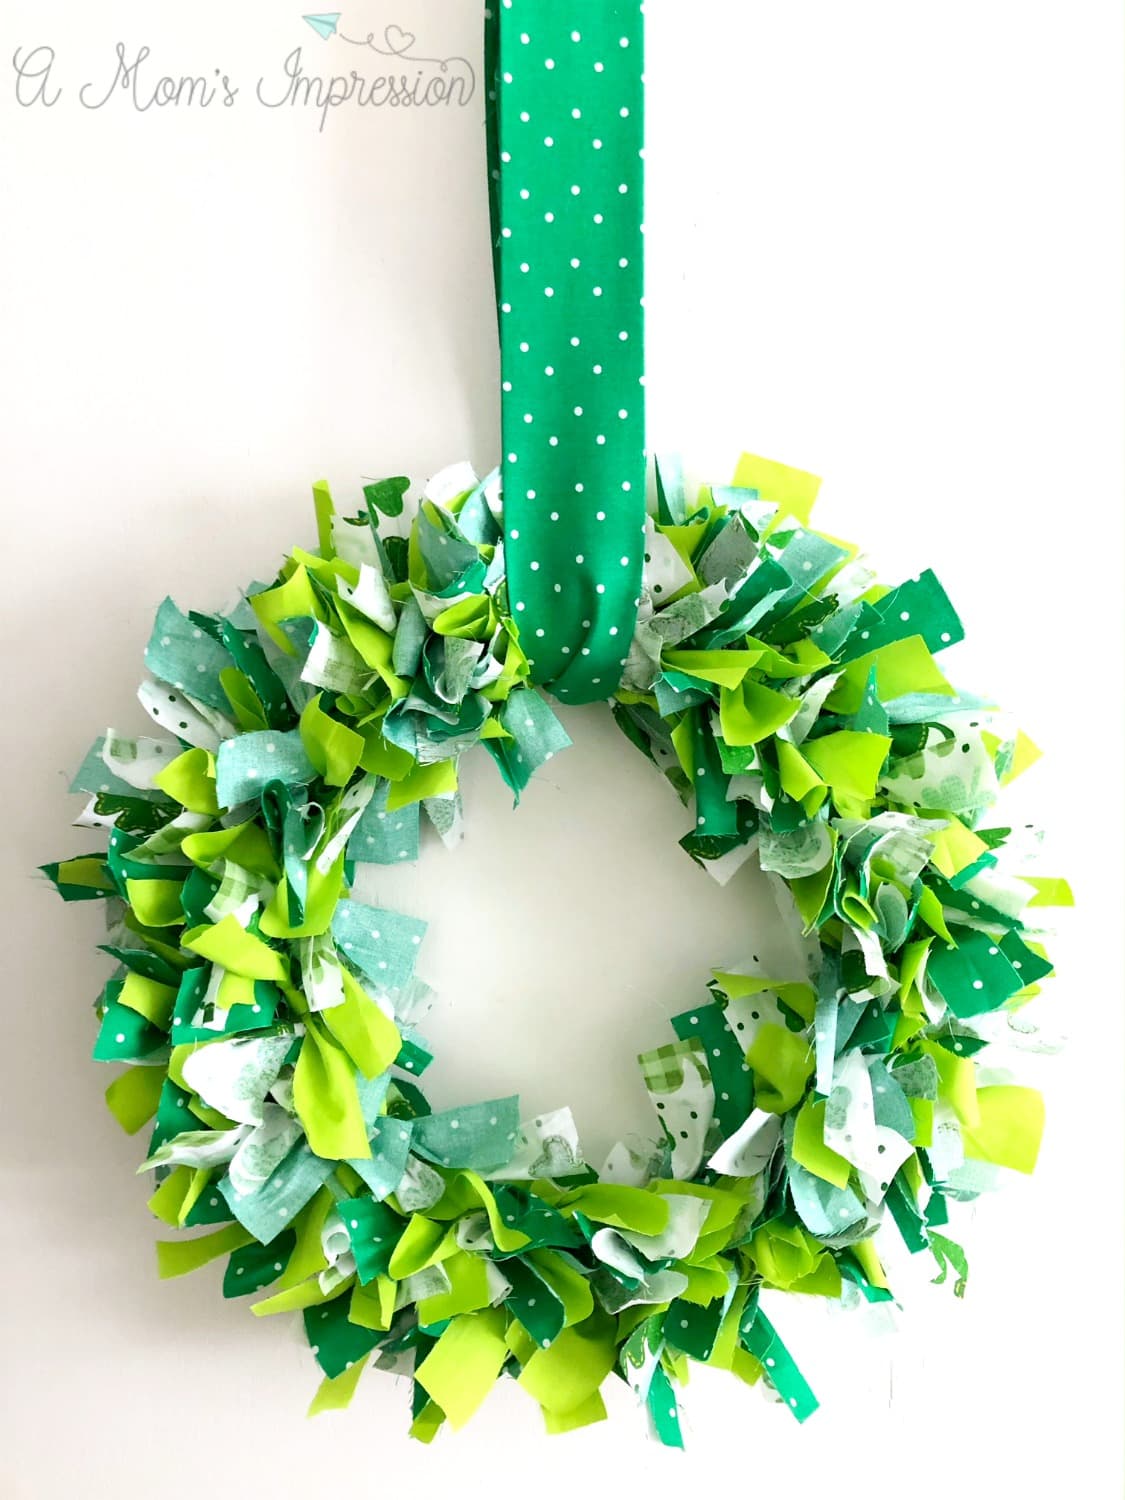 How to Make a Shamrock Wreath from A Mom's Impression